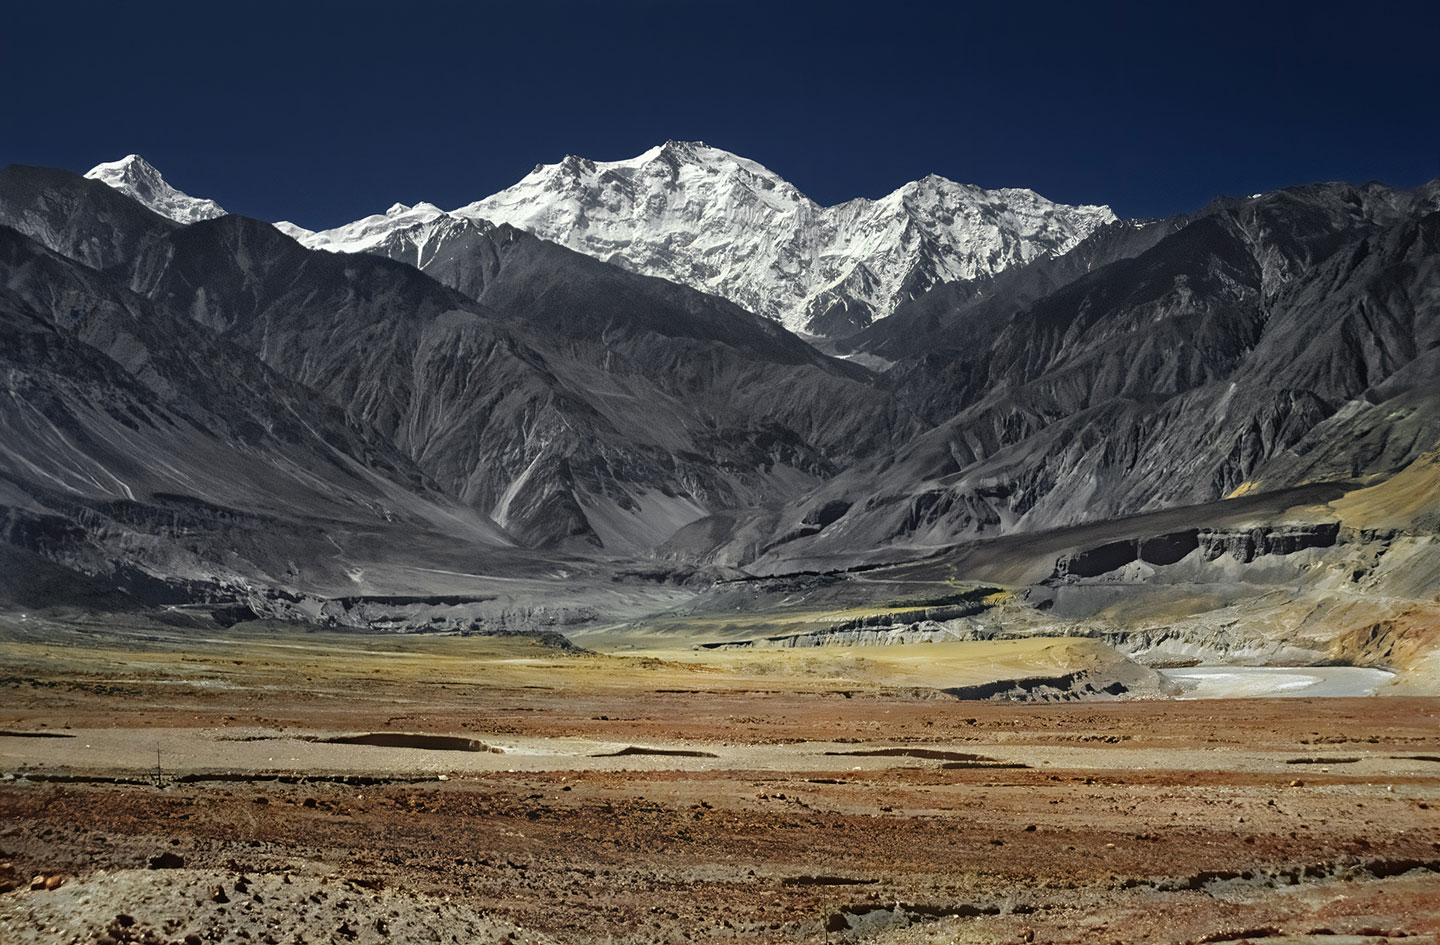 Nanga Parbat - View across the Indus and desert plains in the Northern Areas of Pakistan